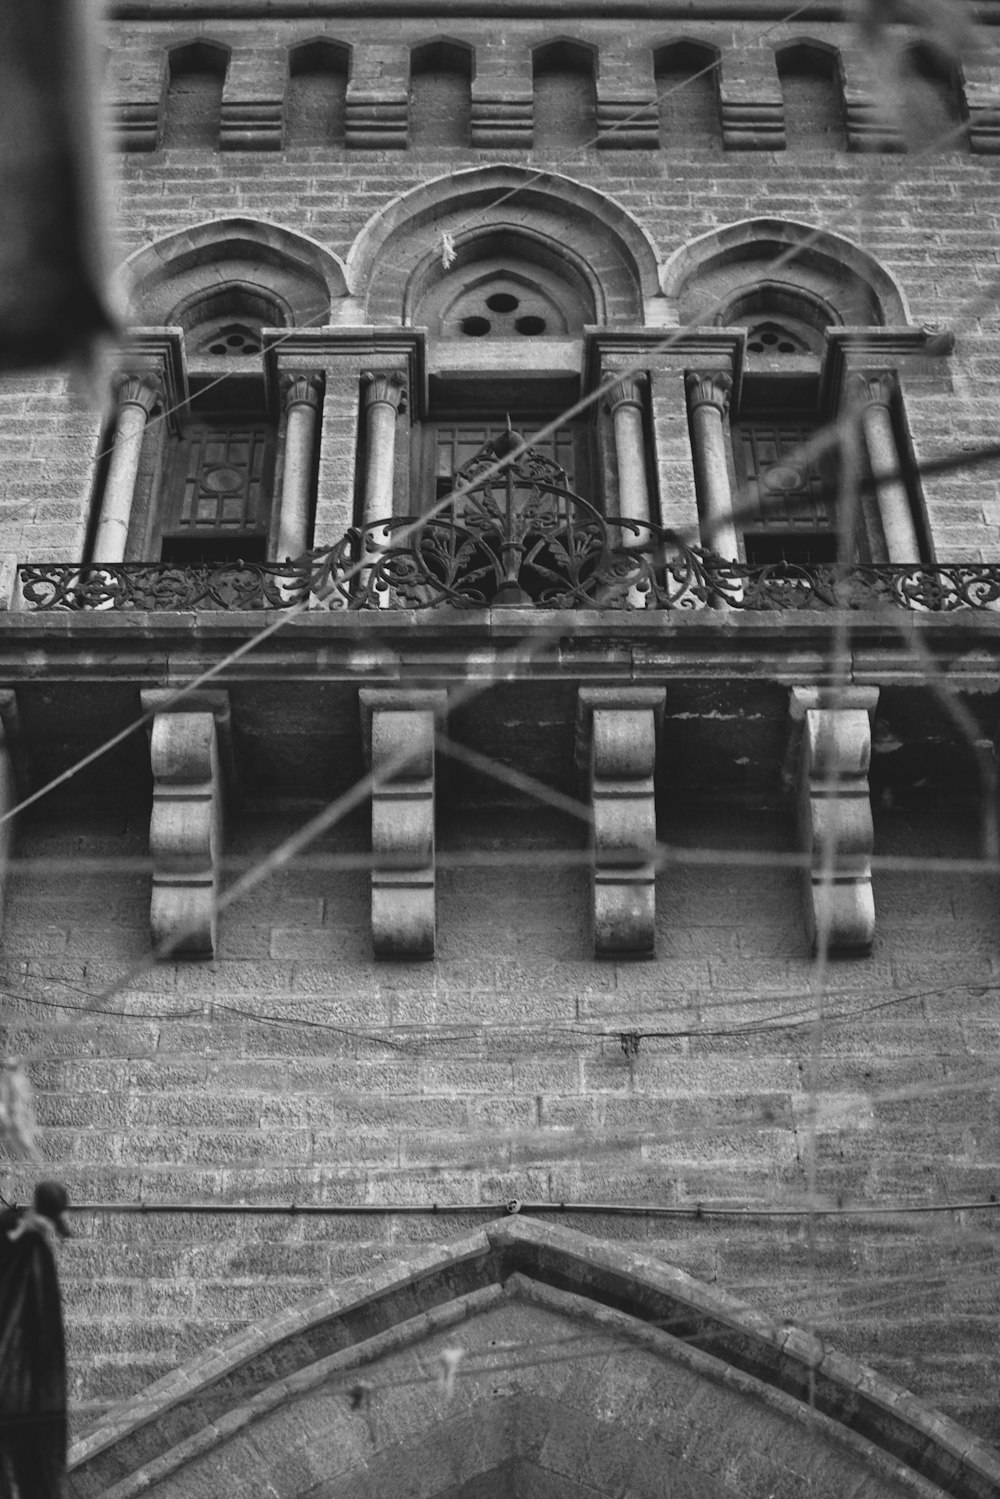 a black and white photo of a building with a balcony